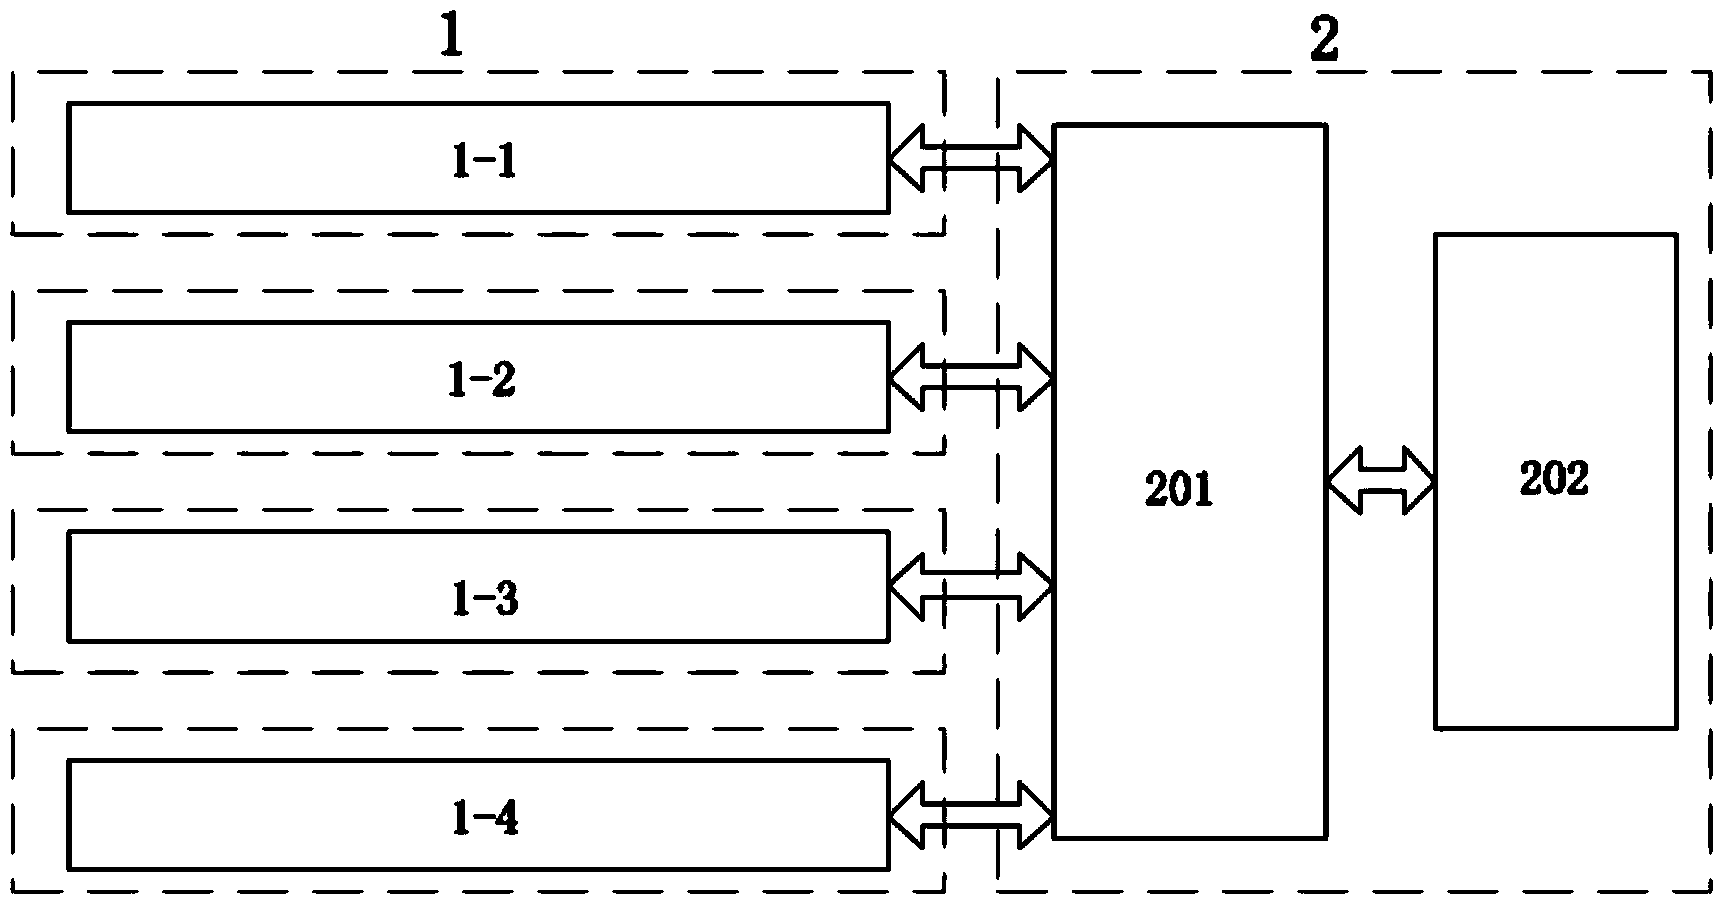 Time frequency synchronization calibration method of SCA-based multi-channel high-speed acquisition system